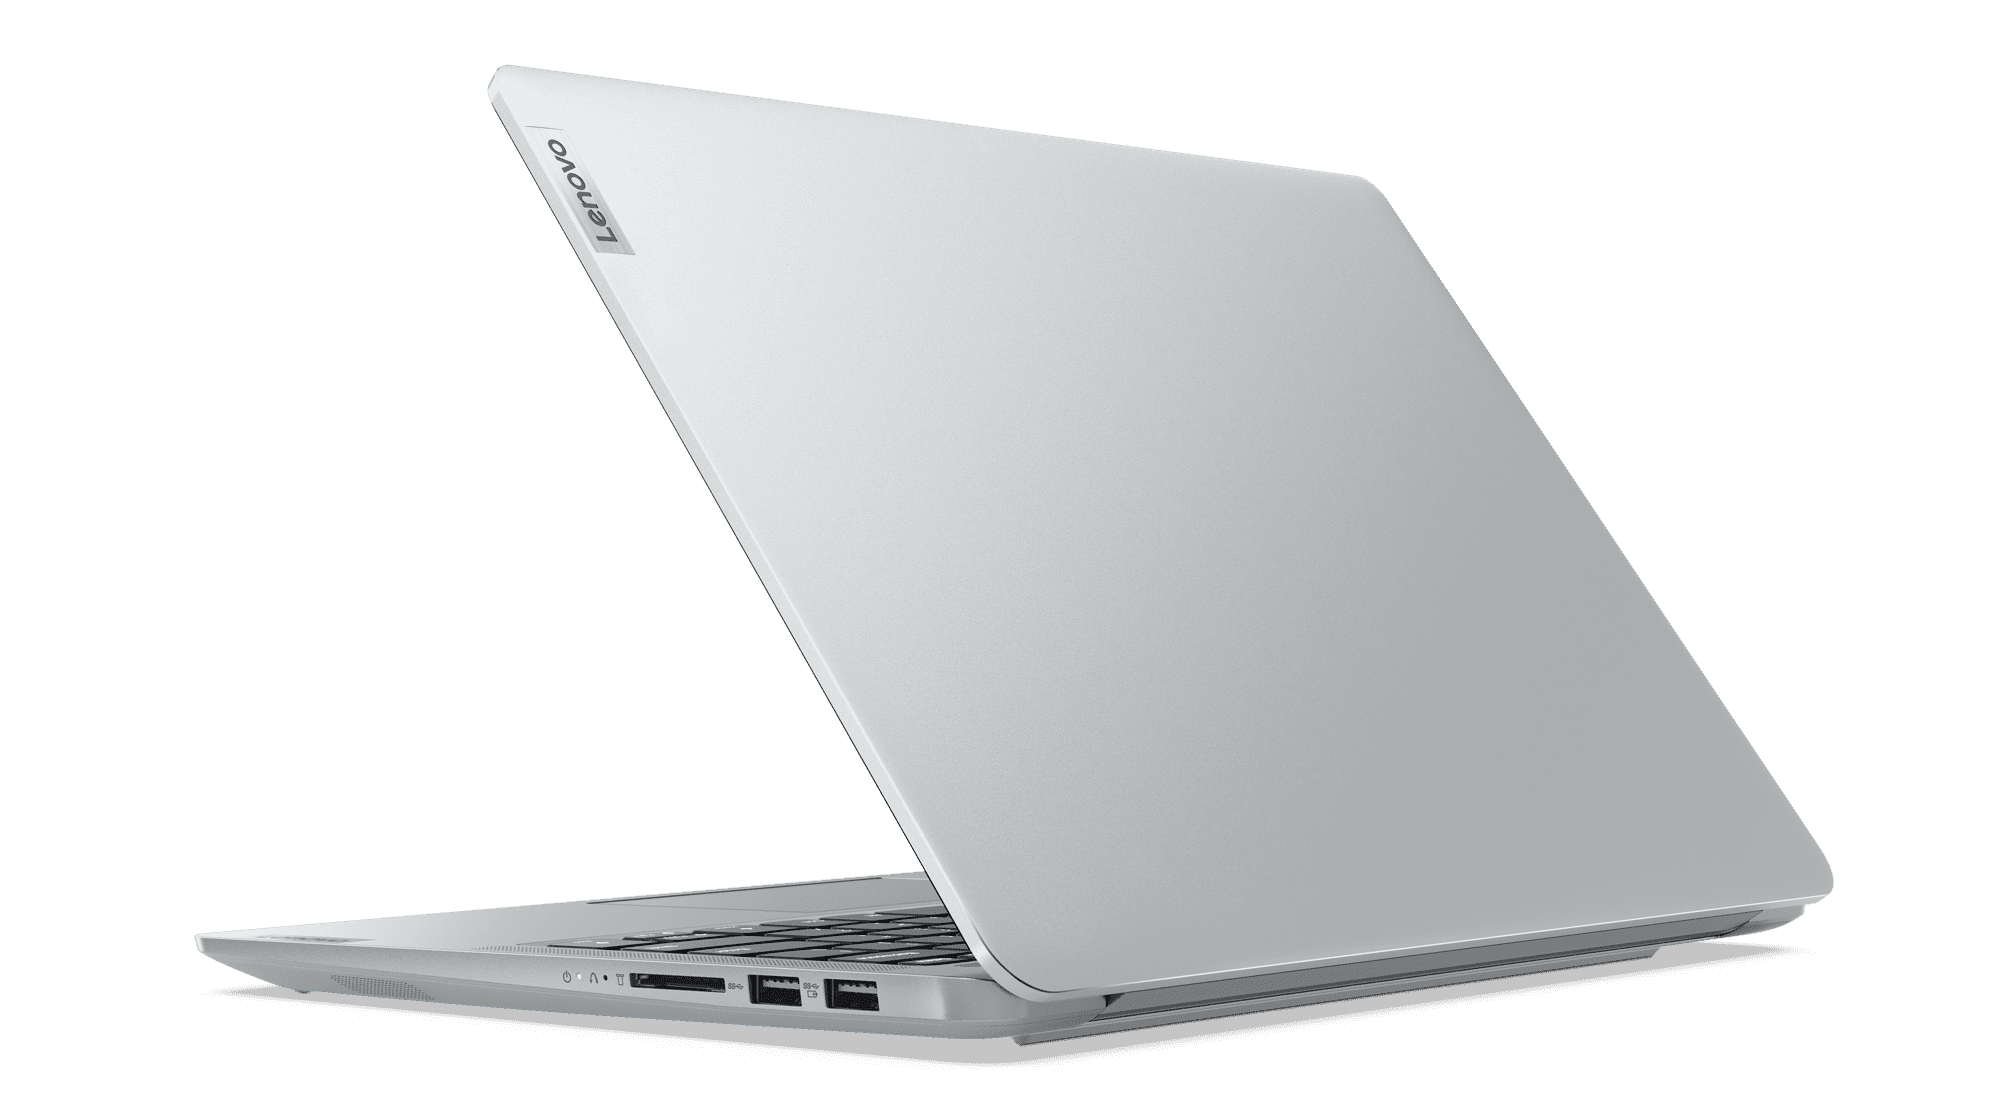 The 14-inch IdeaPad 5i Pro with Intel CPU in Cloud Grey